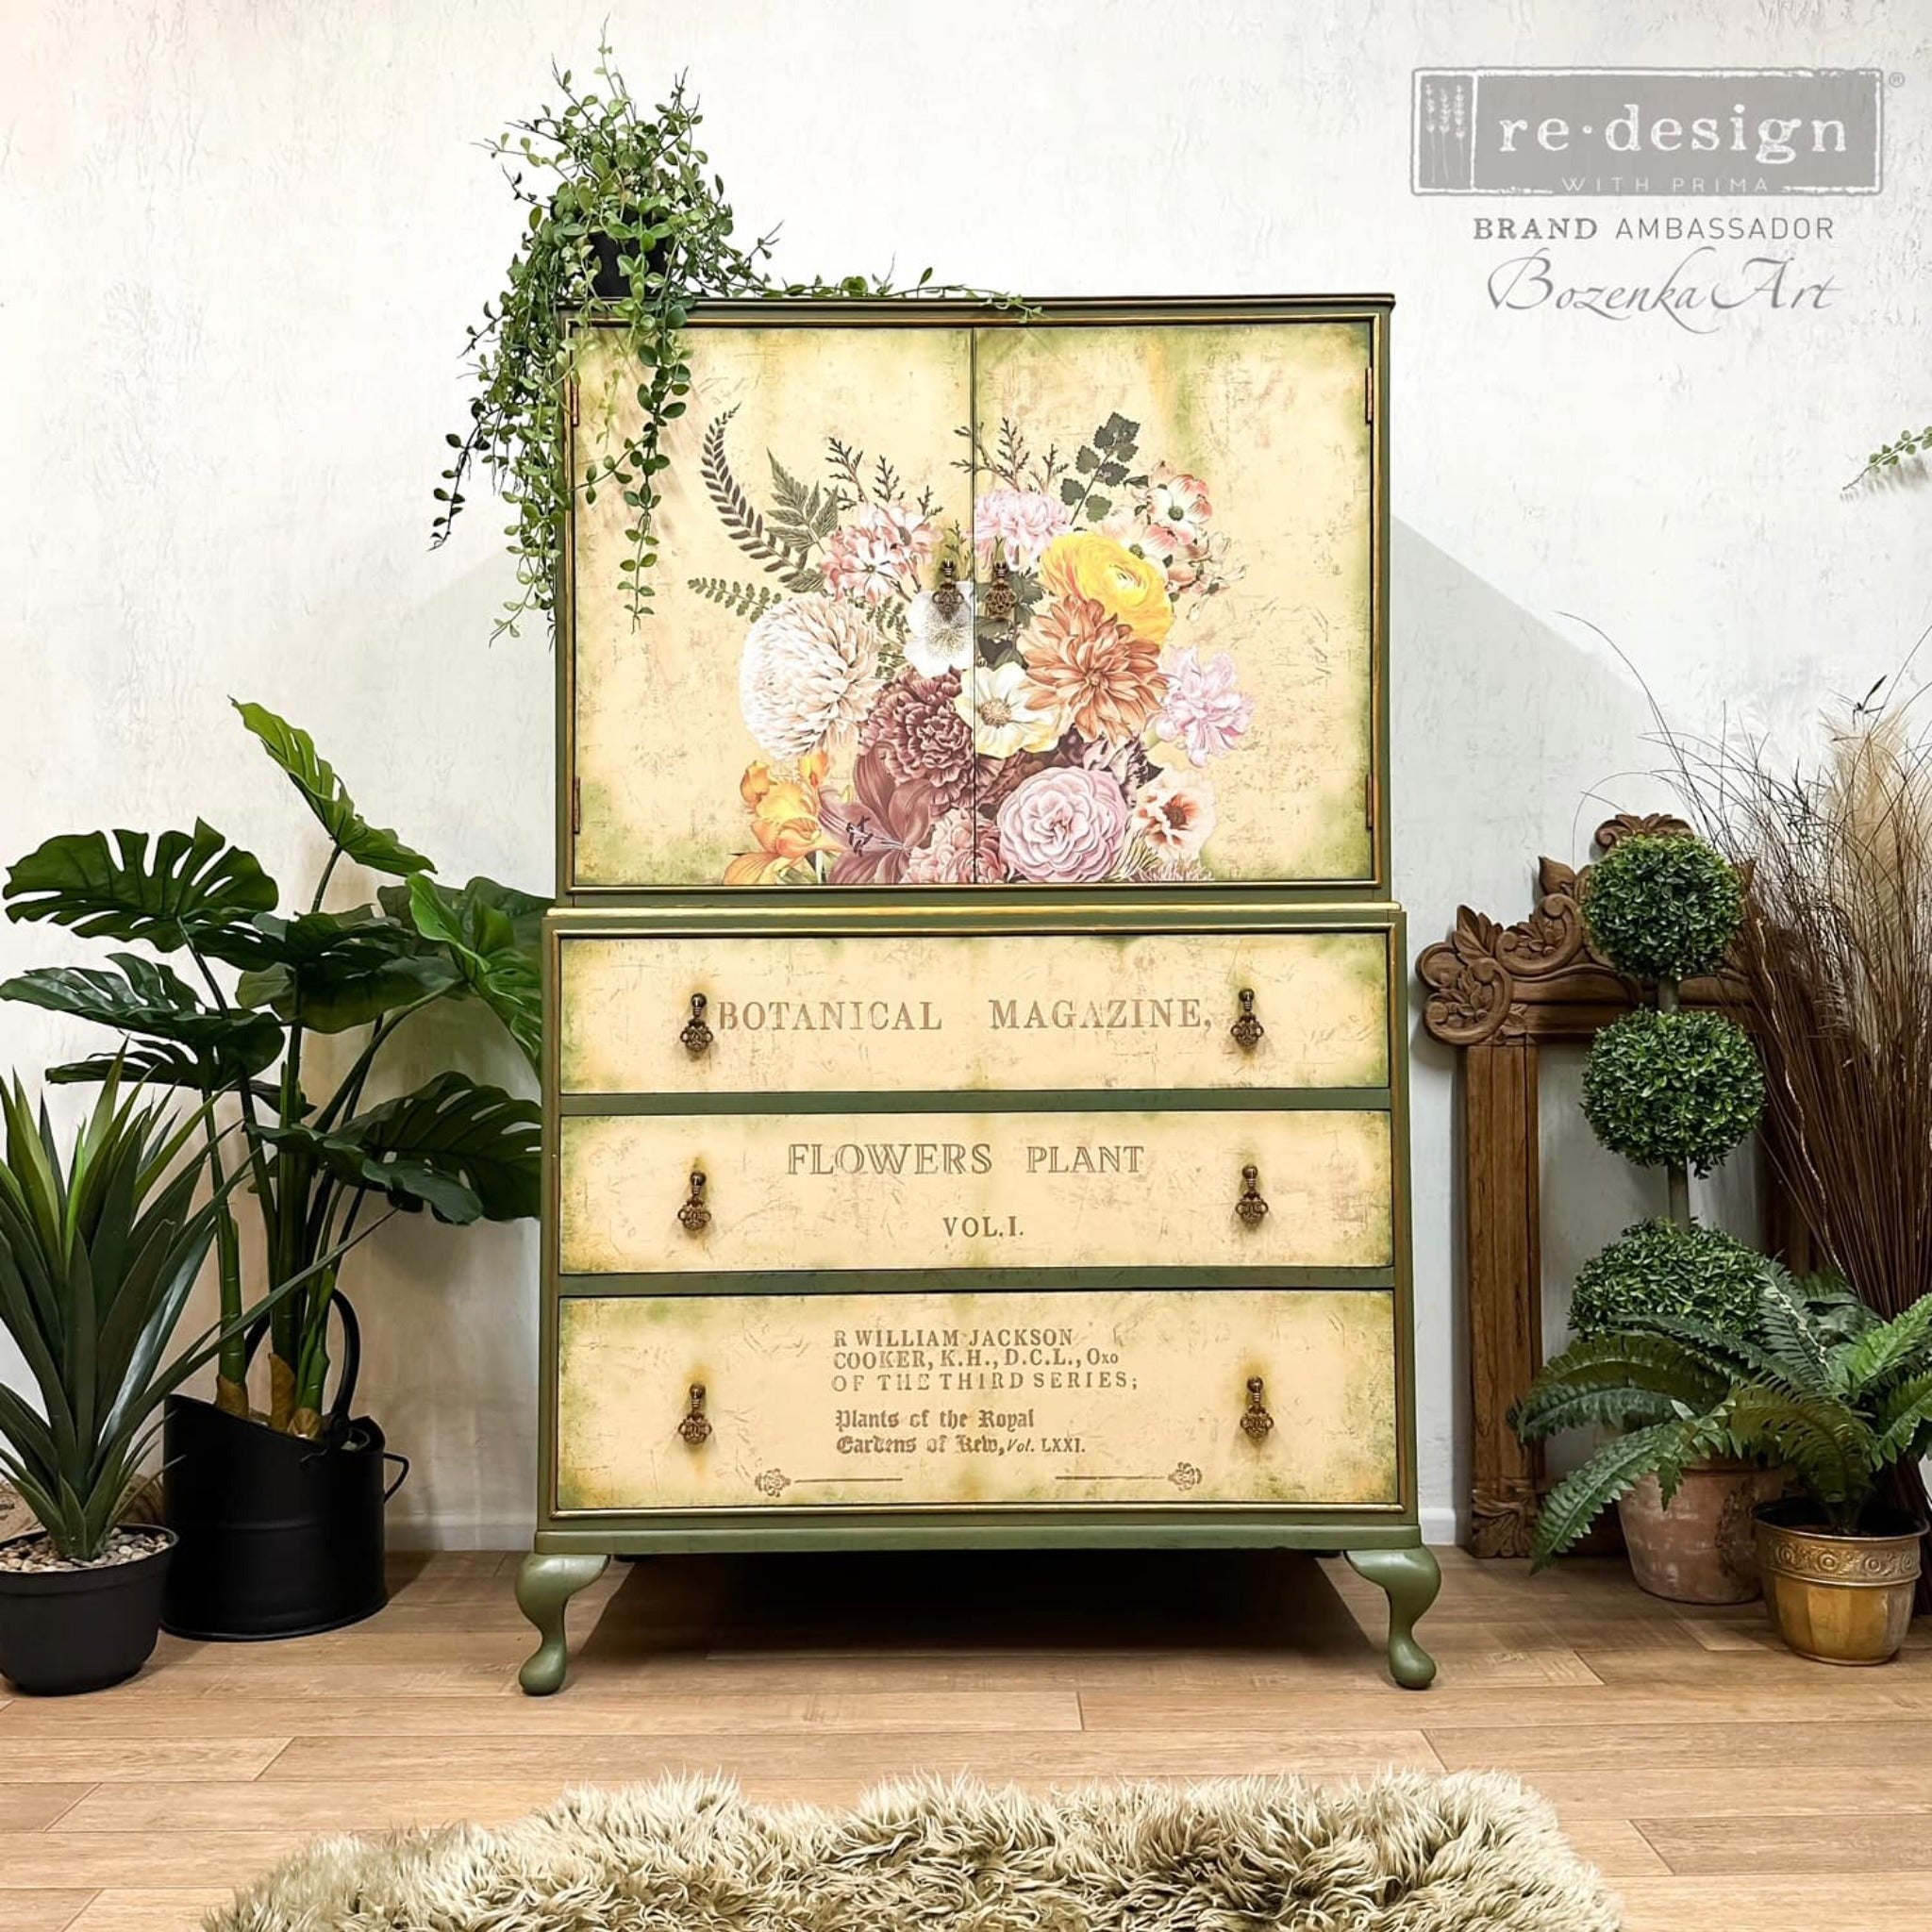 A vintage armoire refurbished by Bozenka Art is painted olive green with beige doors and drawers and features ReDesign with Prima's Kacha Woodland Floral transfer in the center of the 2 doors.